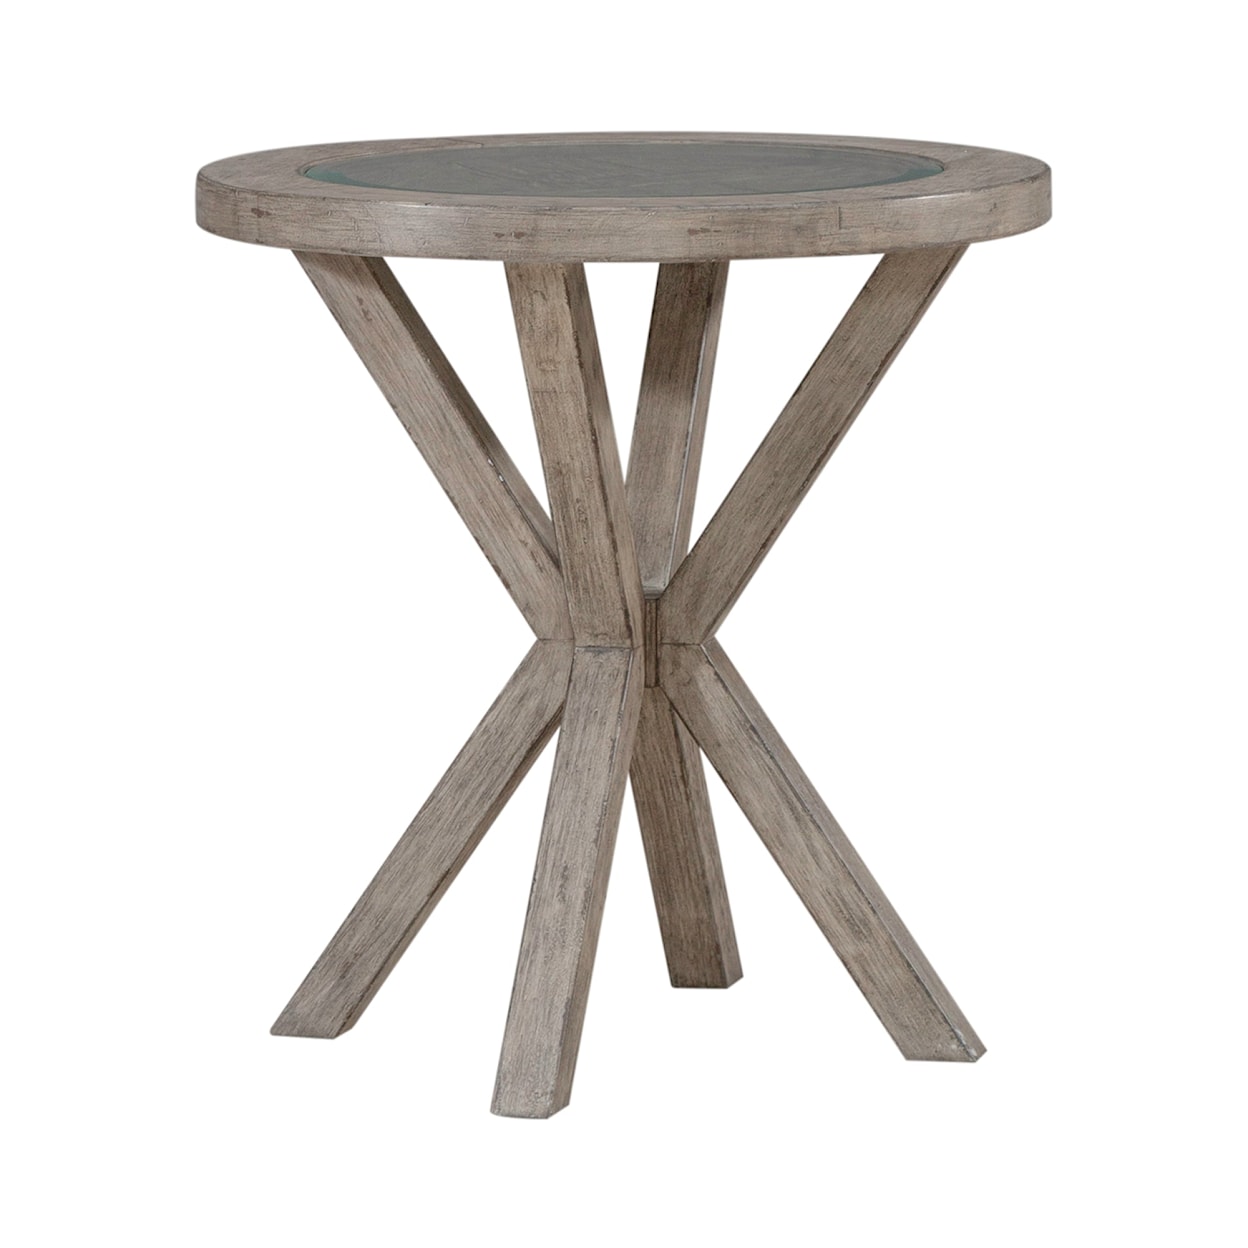 Libby Skyview Lodge Round Chairside Table